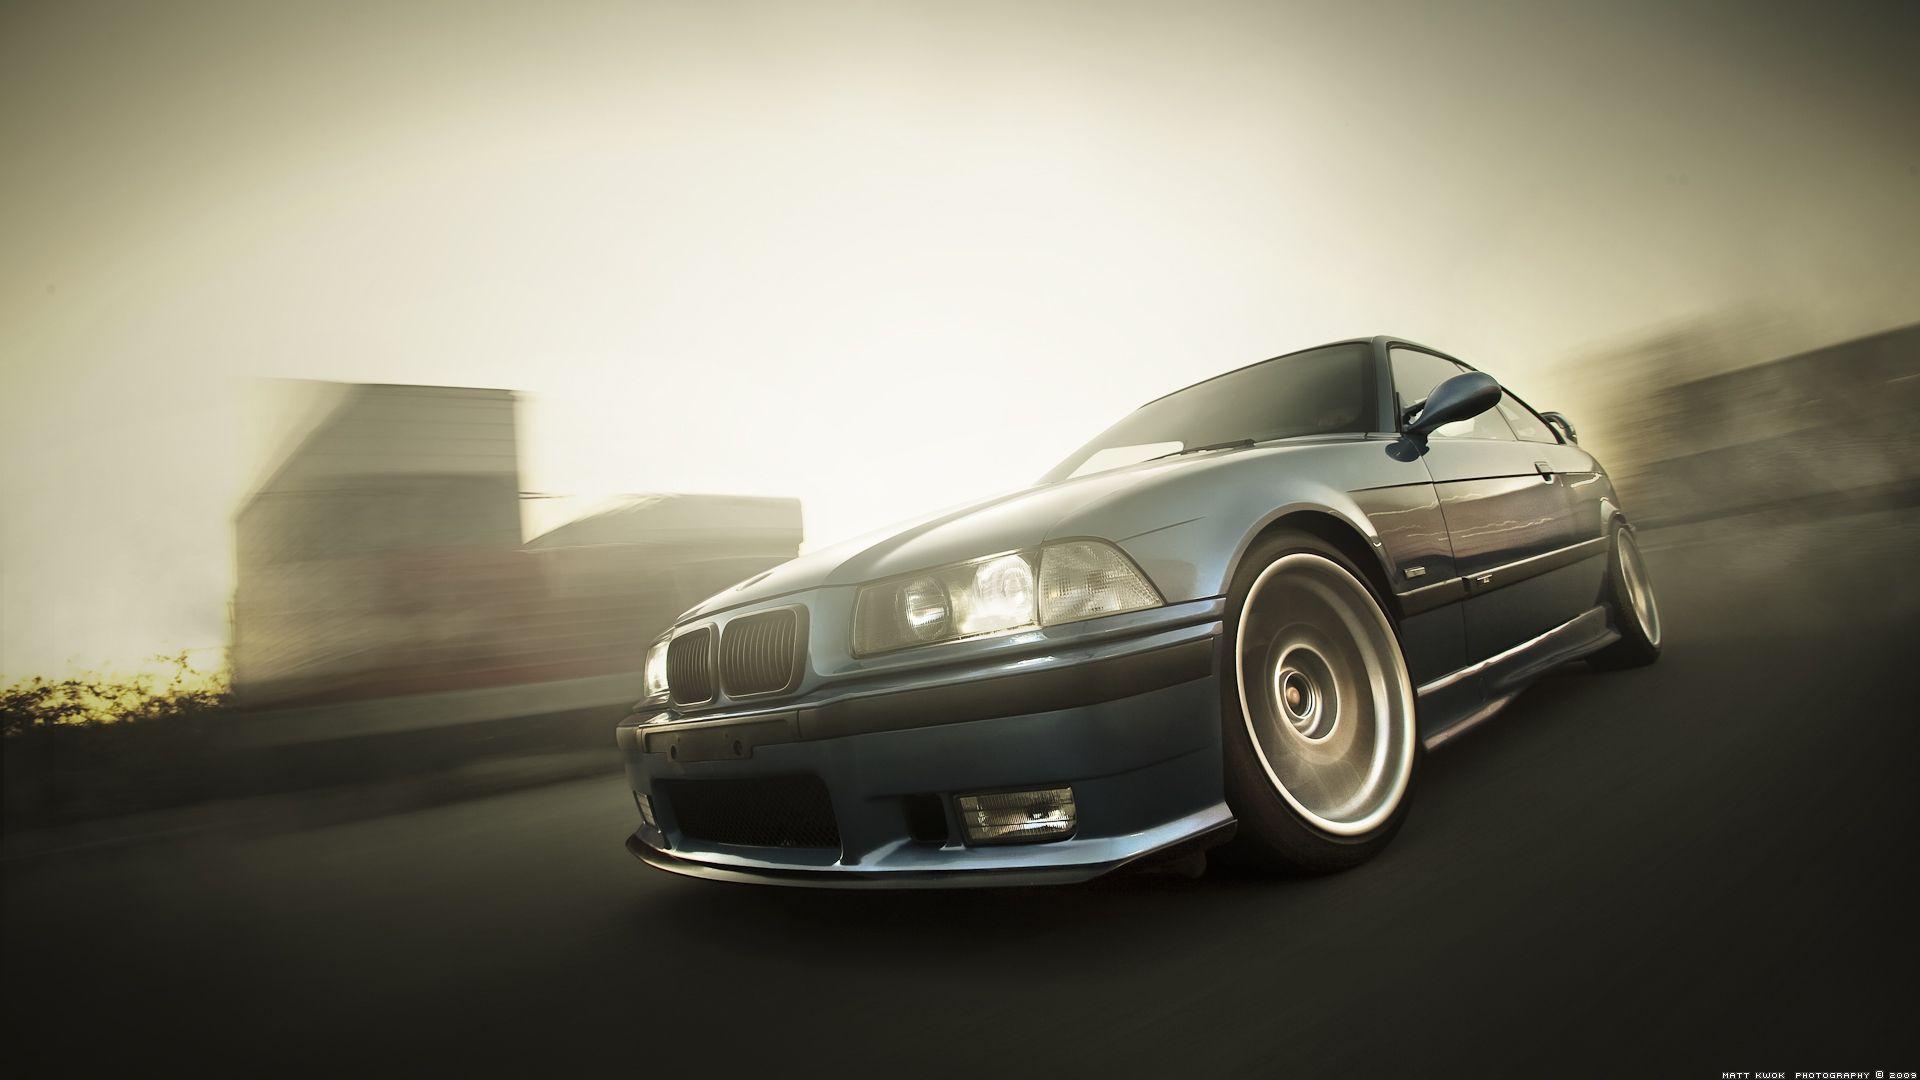 E36 M3.cool pic. car related. BMW, Cars